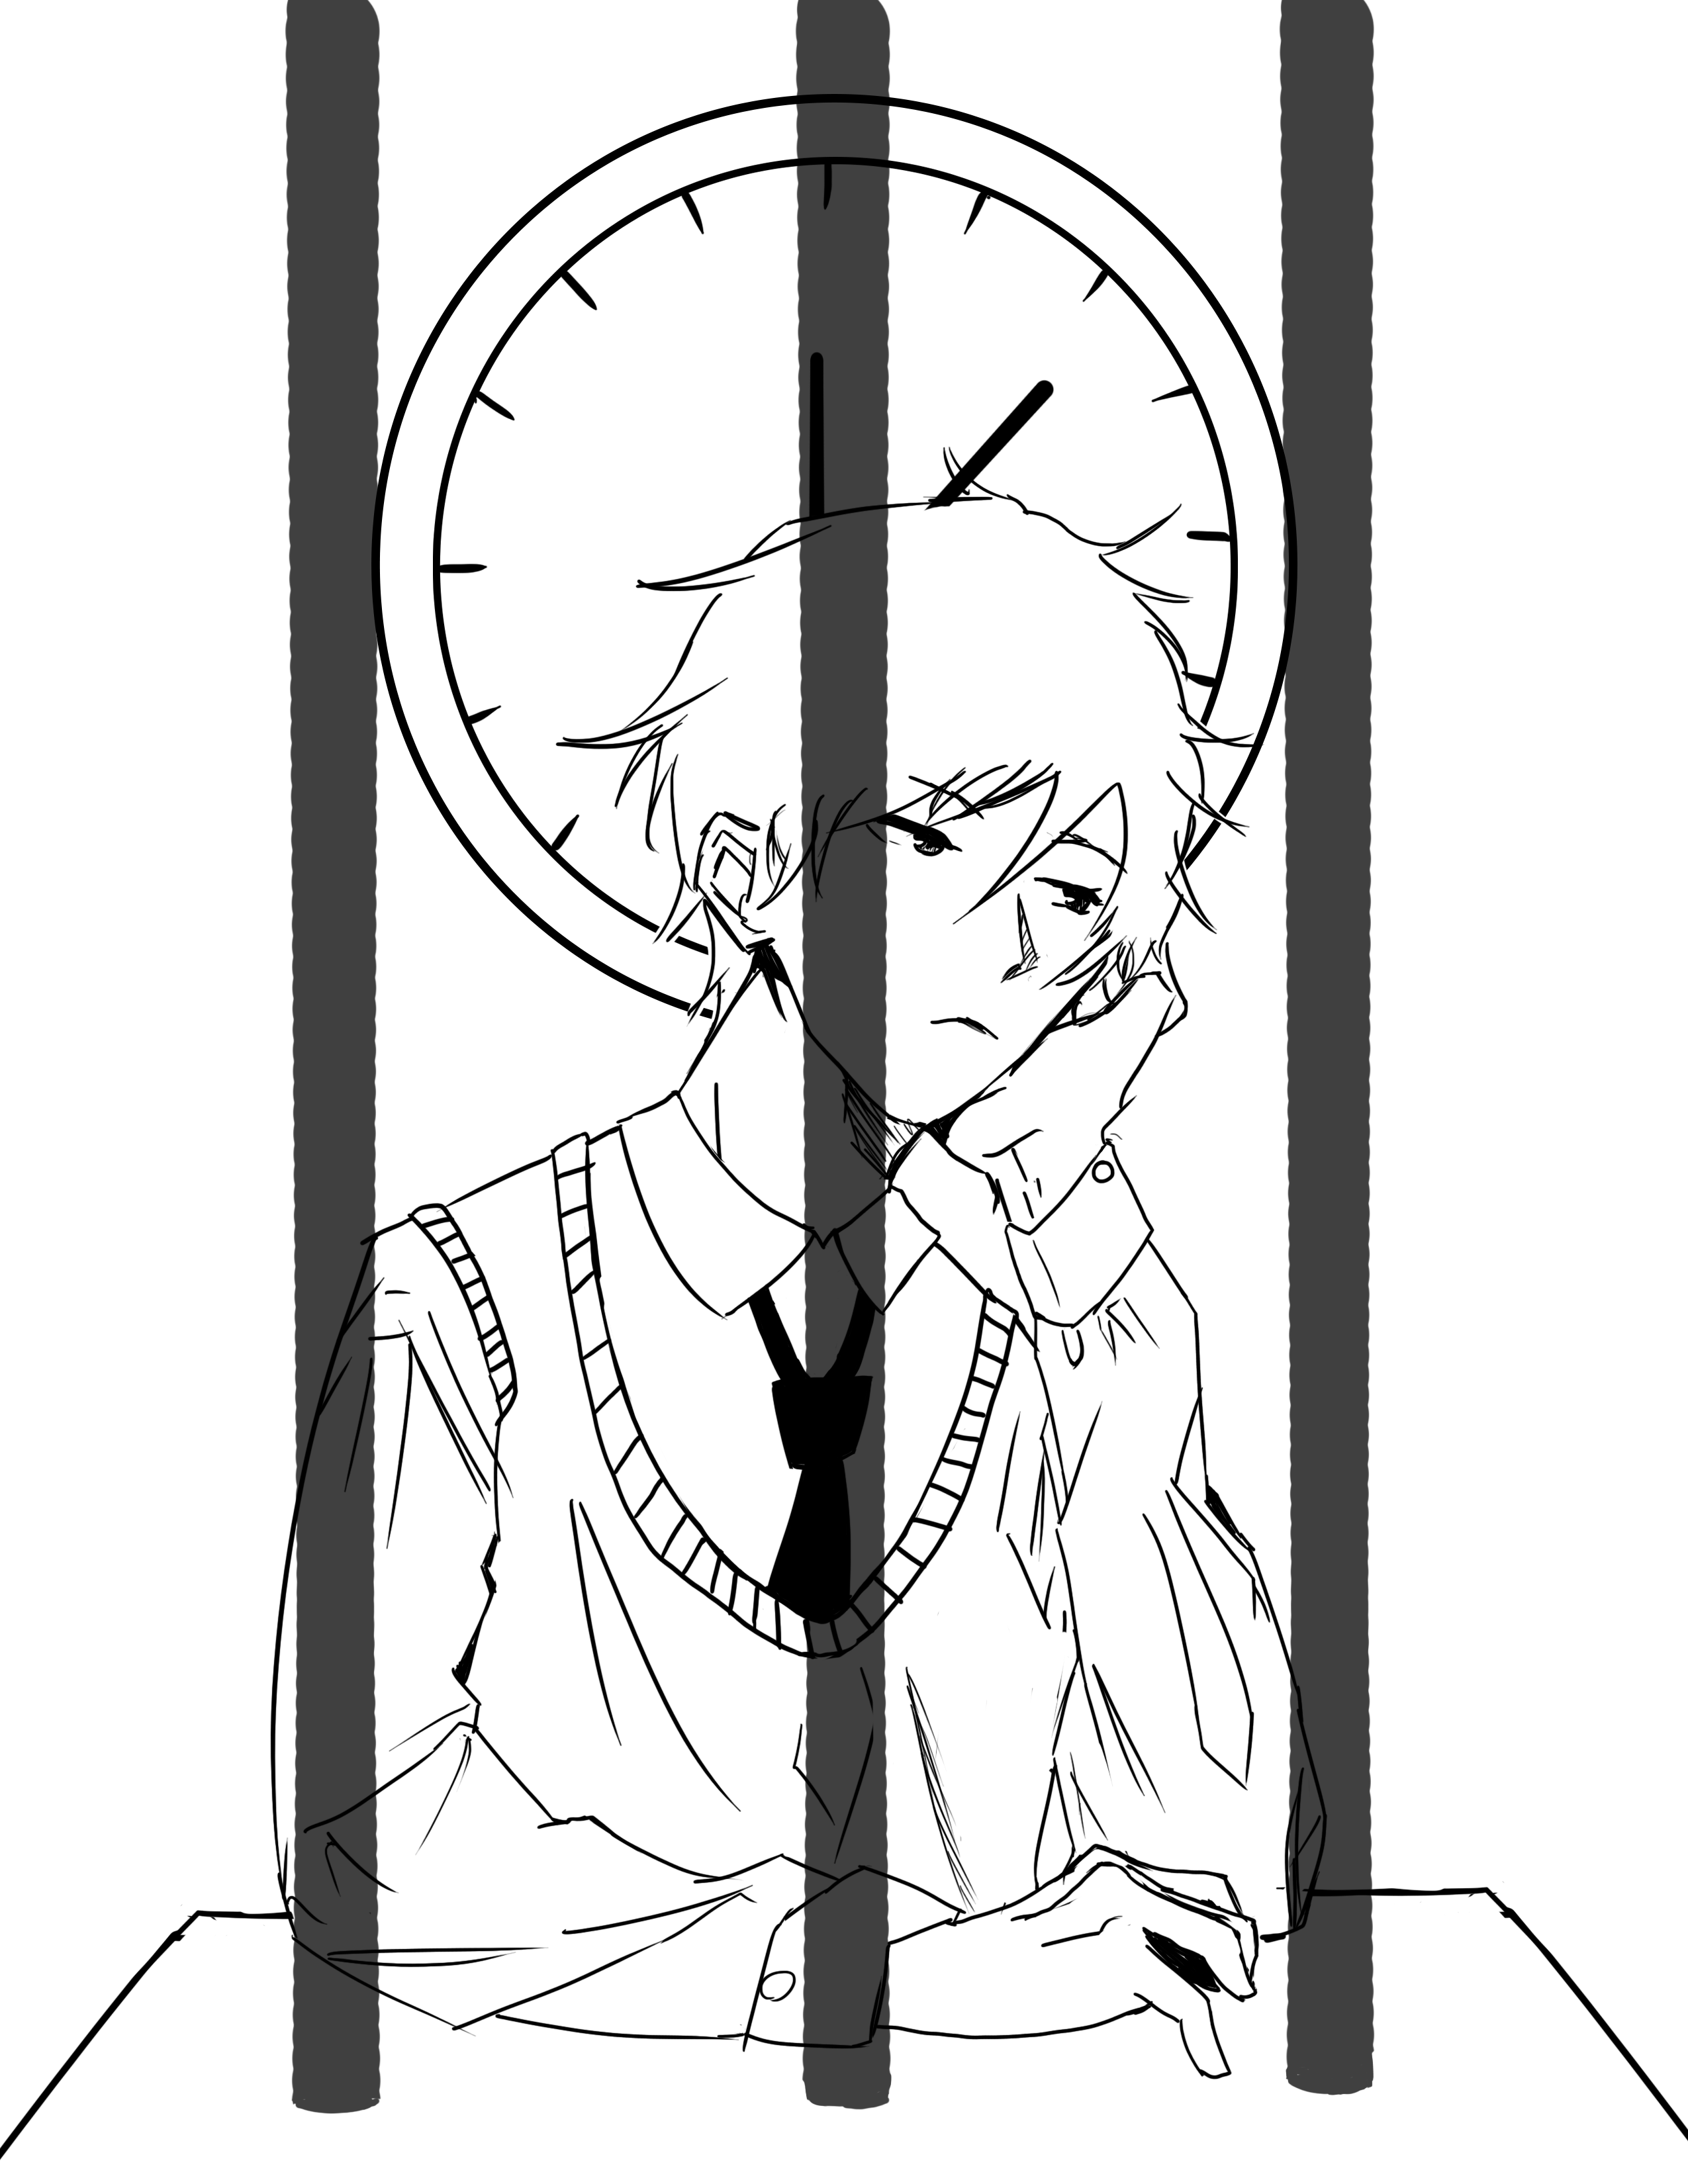 Image of a student bored behind bars with a clock behind them